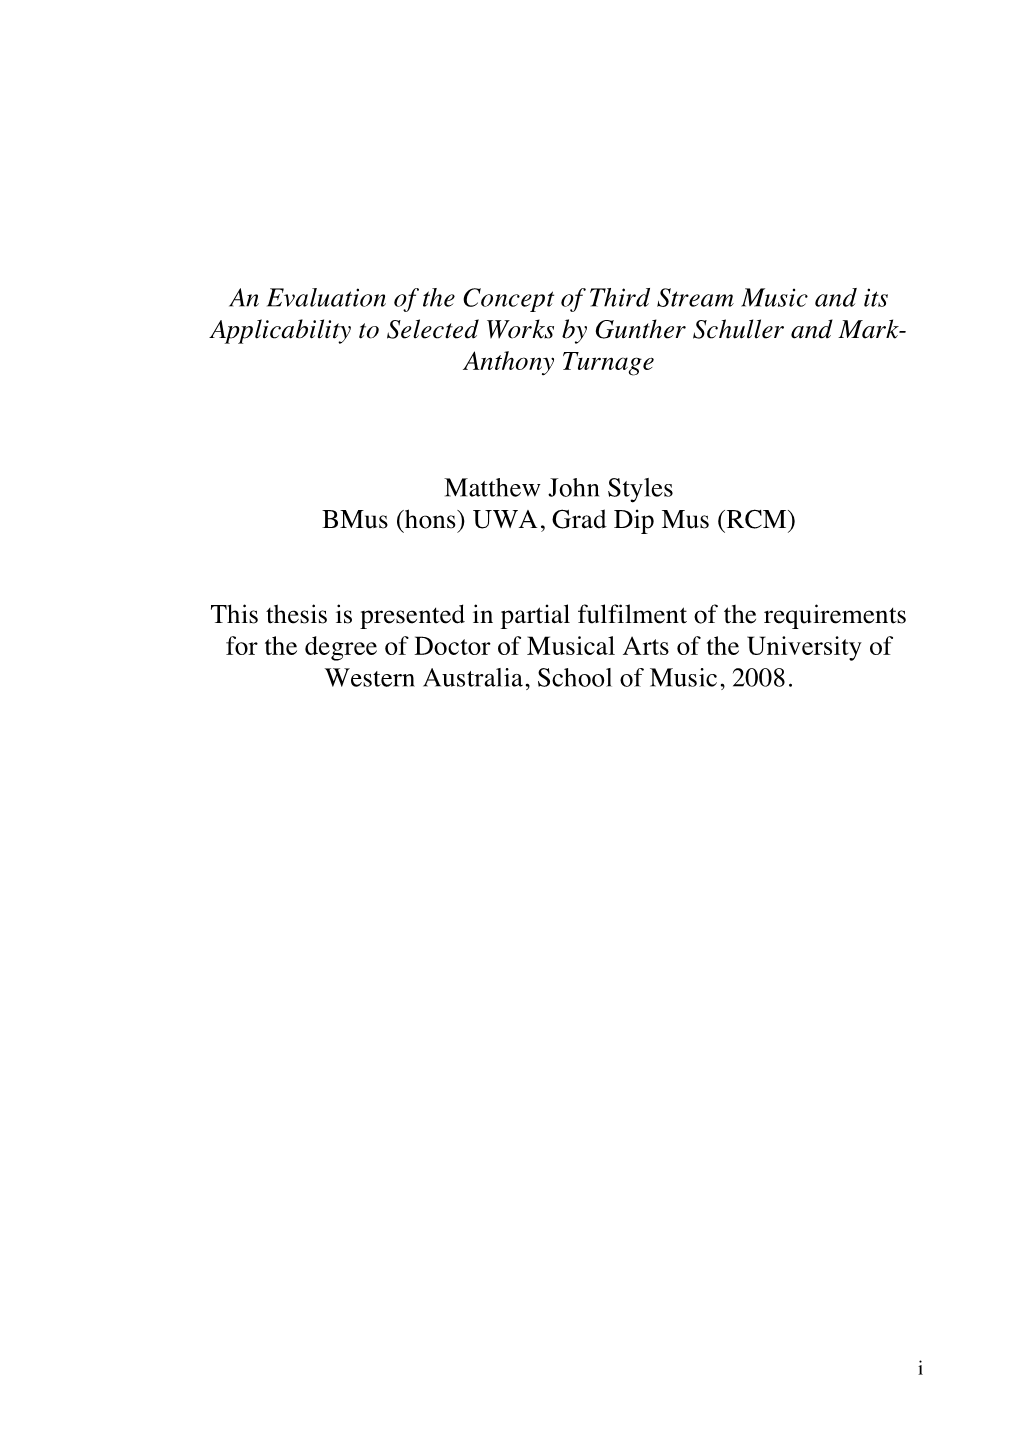 An Evaluation of the Concept of Third Stream Music and Its Applicability to Selected Works by Gunther Schuller and Mark- Anthony Turnage